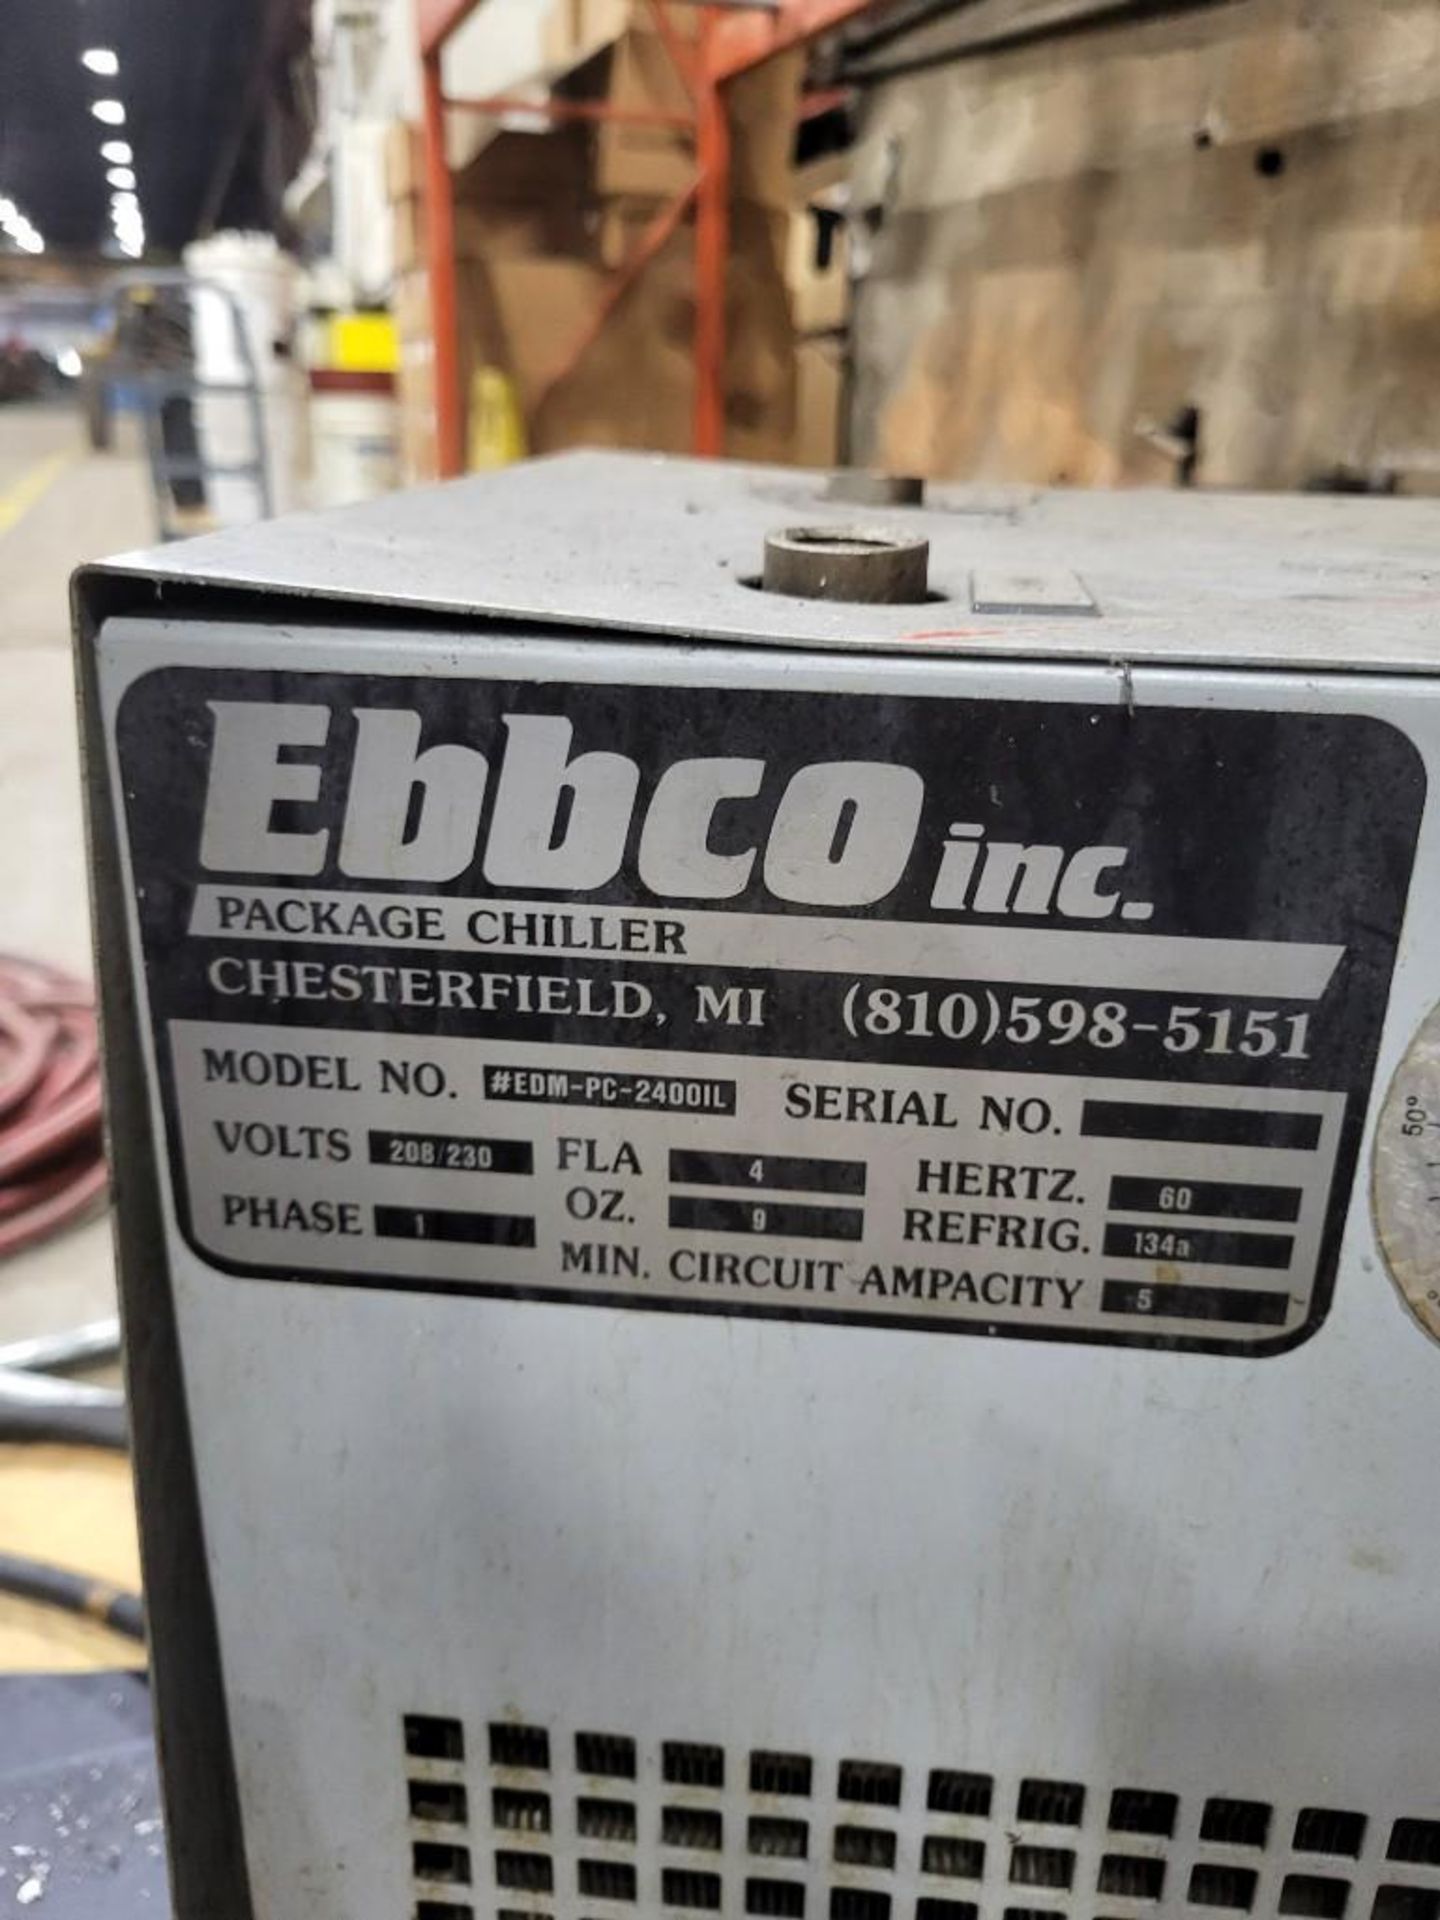 EBBCO INC. PACKAGE CHILLER - Image 2 of 5